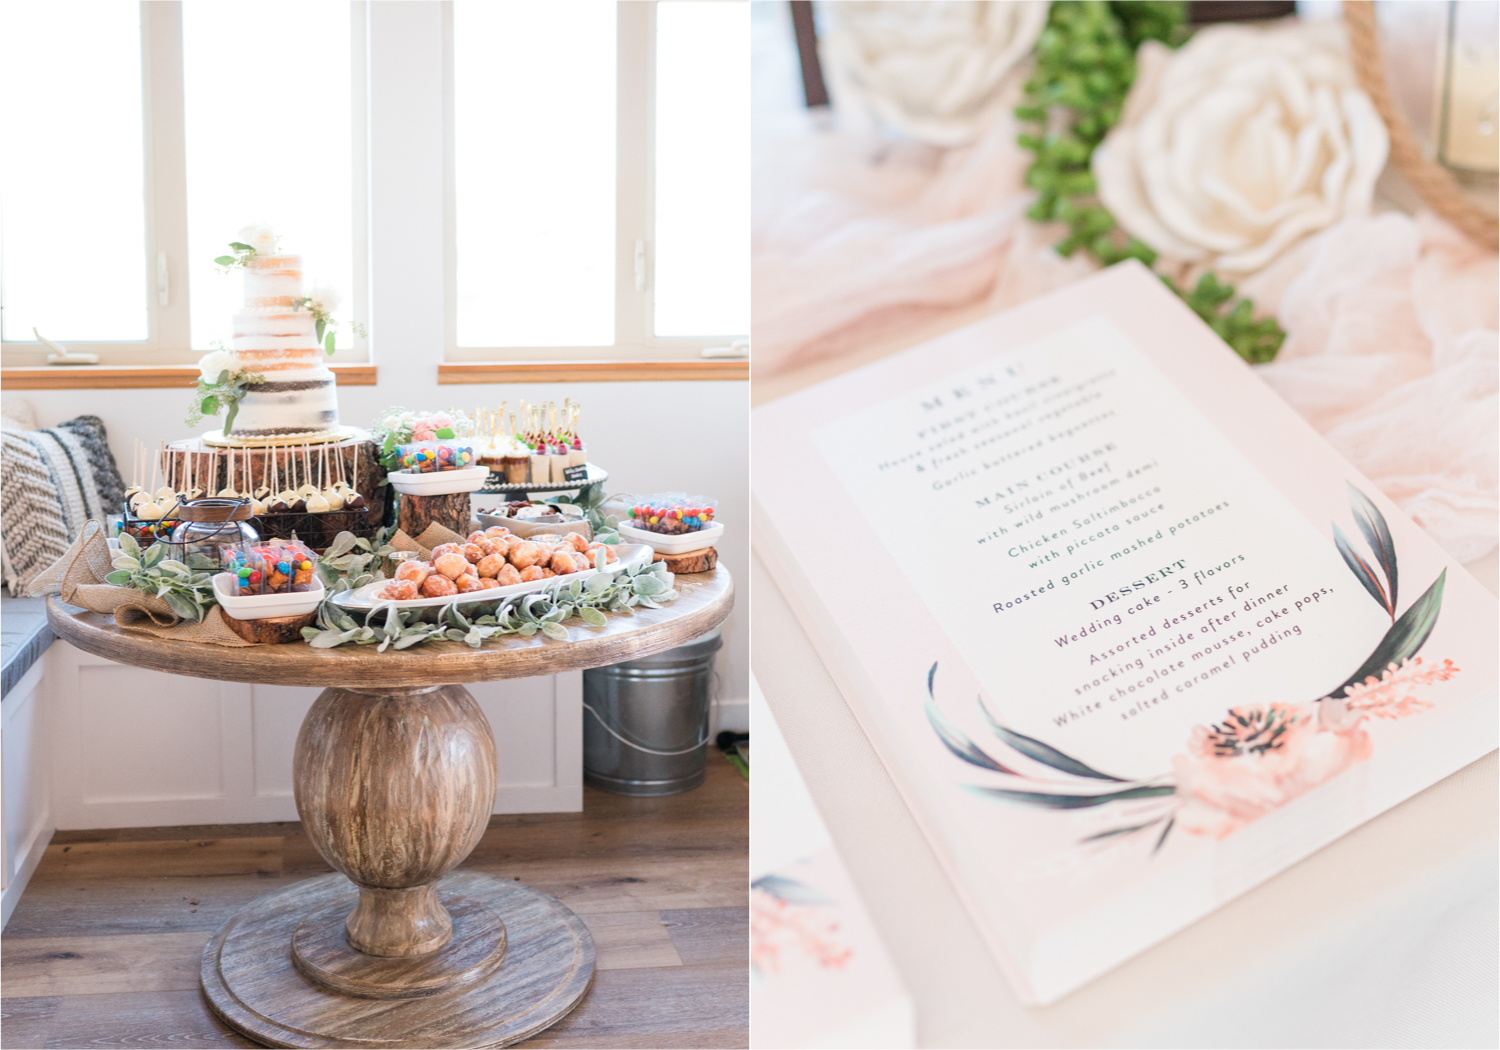 Autumn mountain wedding in Florence Colorado | Britni Girard Photography | Colorado Wedding Photo and Video Team | Mountainside Cabin for intimate wedding with rustic farm-tables and romantic details | Rustic Dessert Table with cake by Sugar Plum Cake Shoppe 